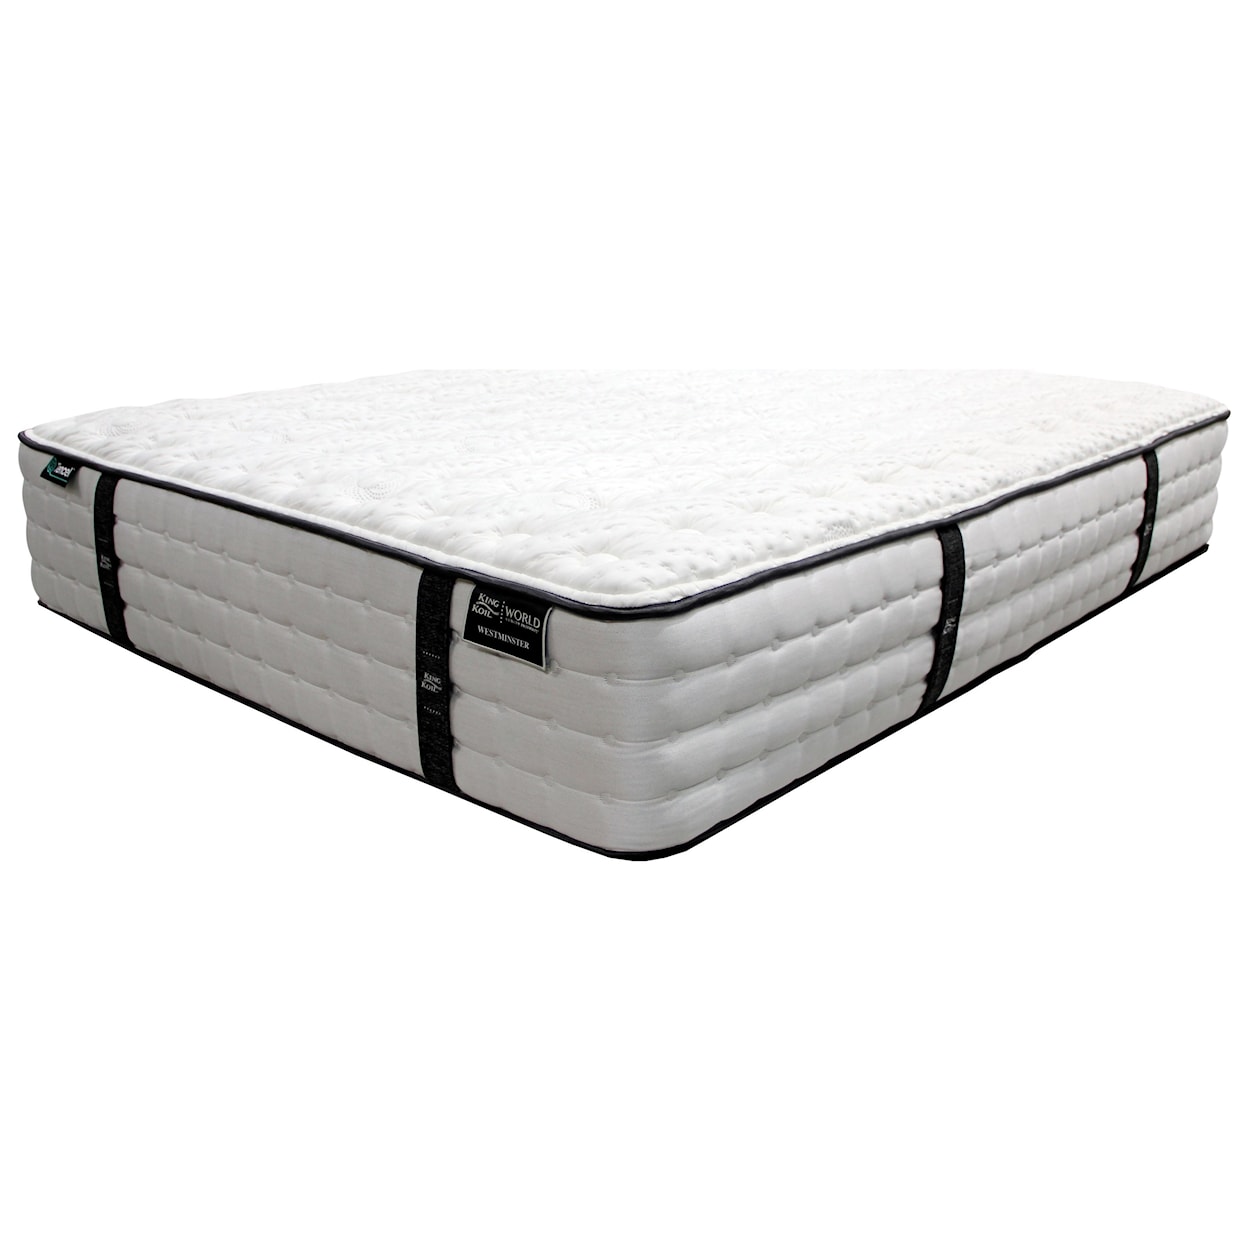 King Koil Westminster F Firm Pocketed Coil Mattress